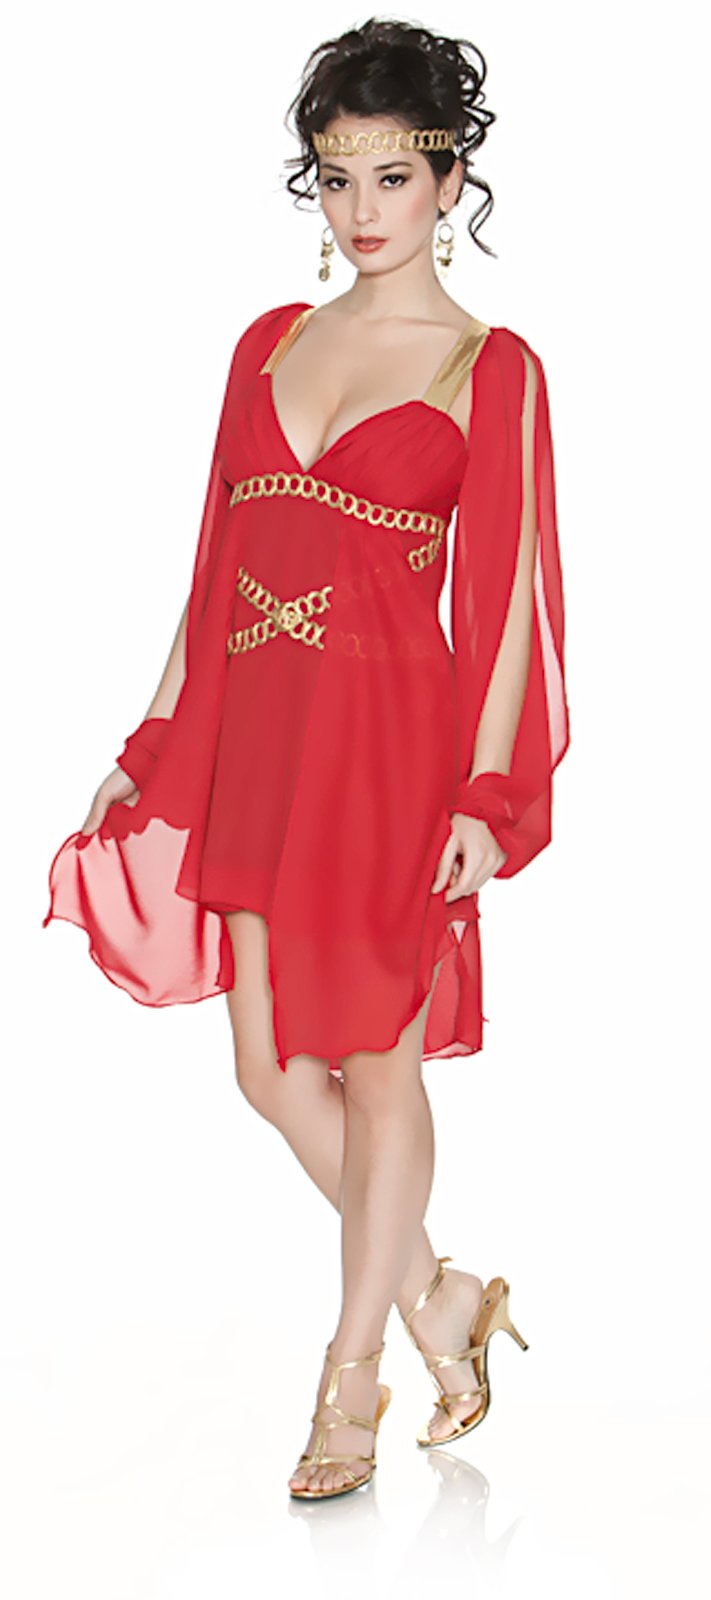 Goddess in Red Adult Plus Costume